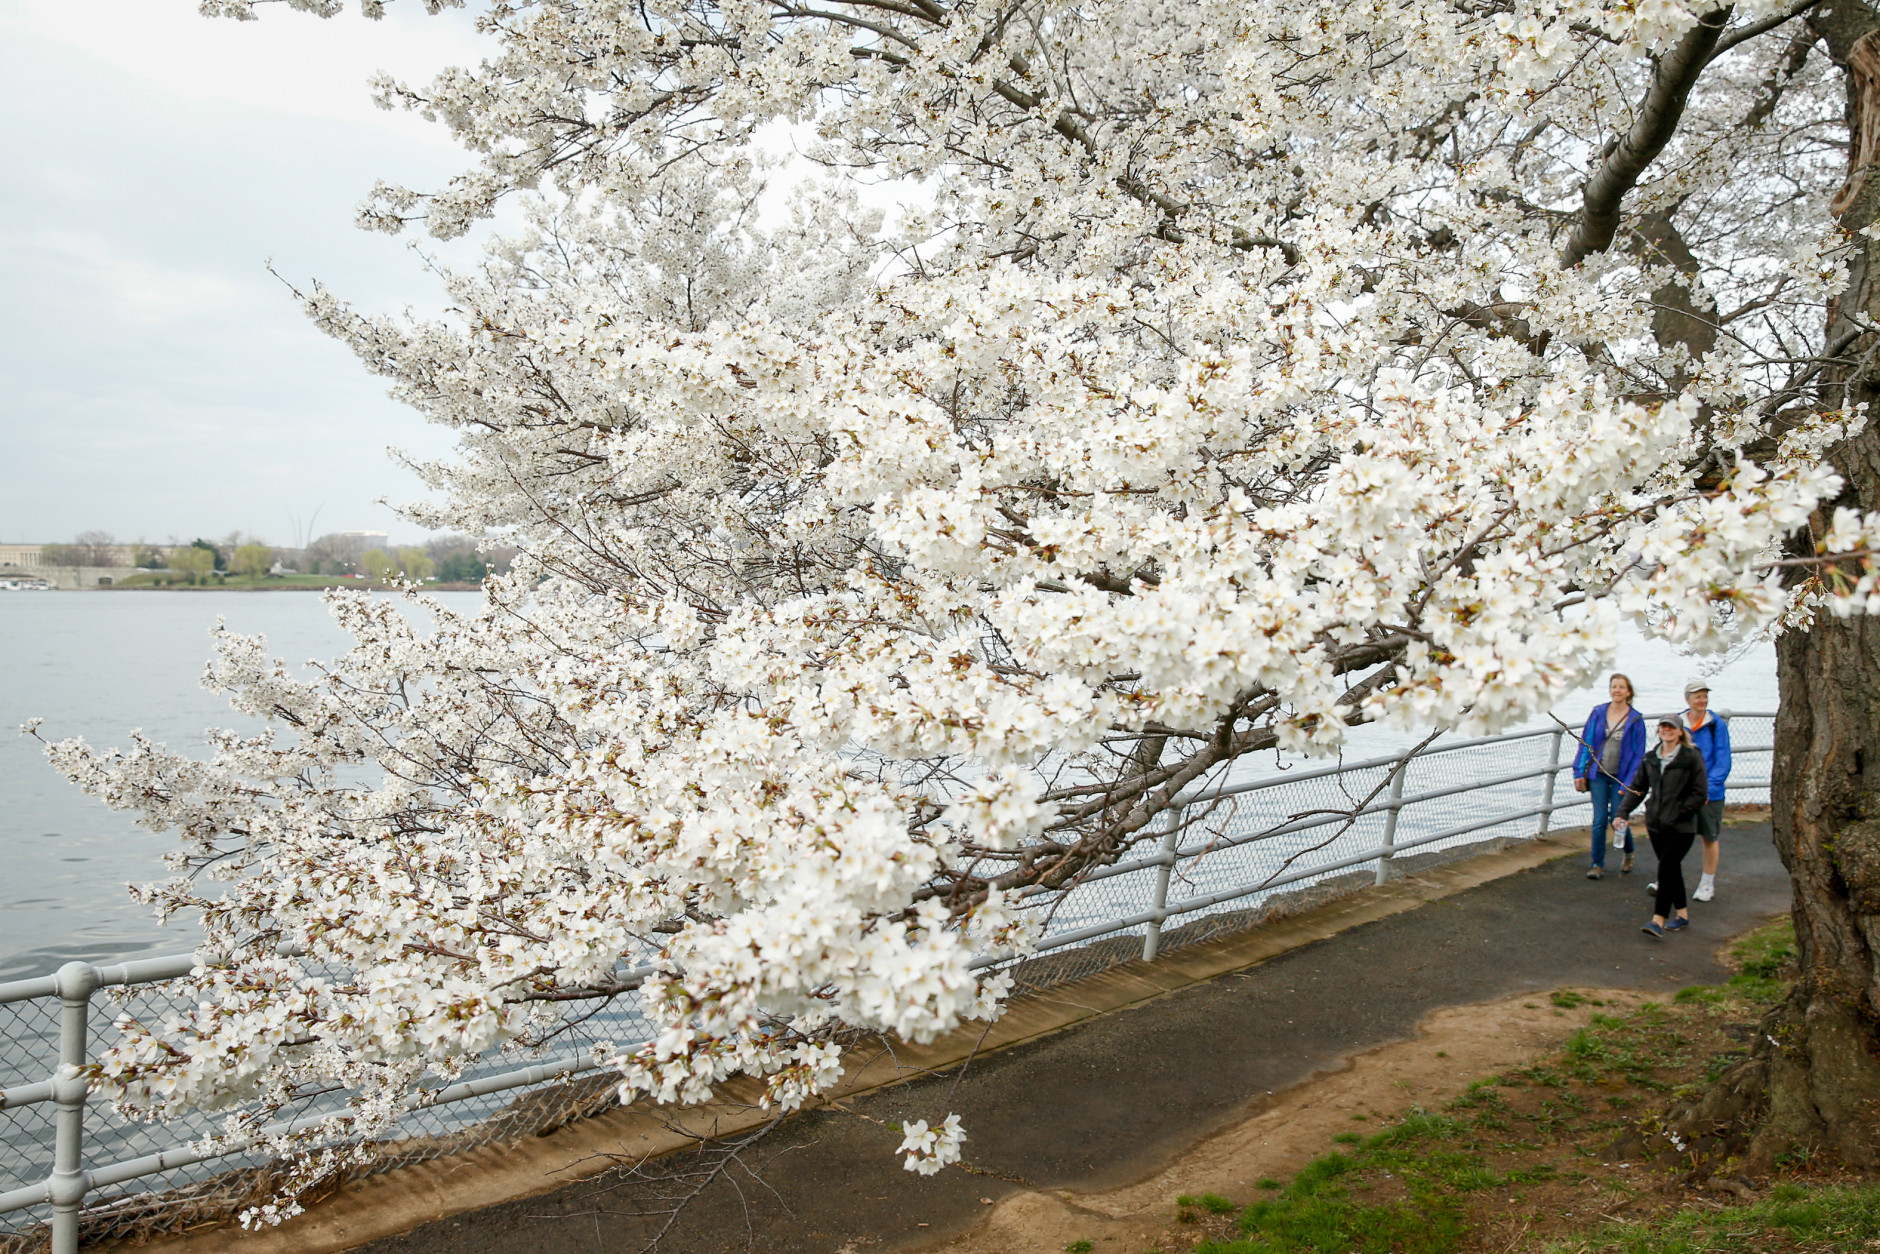 Erin Leigh of Washington, D.C., center, and Diane Rusch, left, and B.K., right, both visiting from Pittsburgh, Pa. walks past cherry blossoms trees in Washington, Tuesday, April 7, 2015. Officials are calling for a peak bloom period from April 11-14th. (AP Photo/Andrew Harnik)